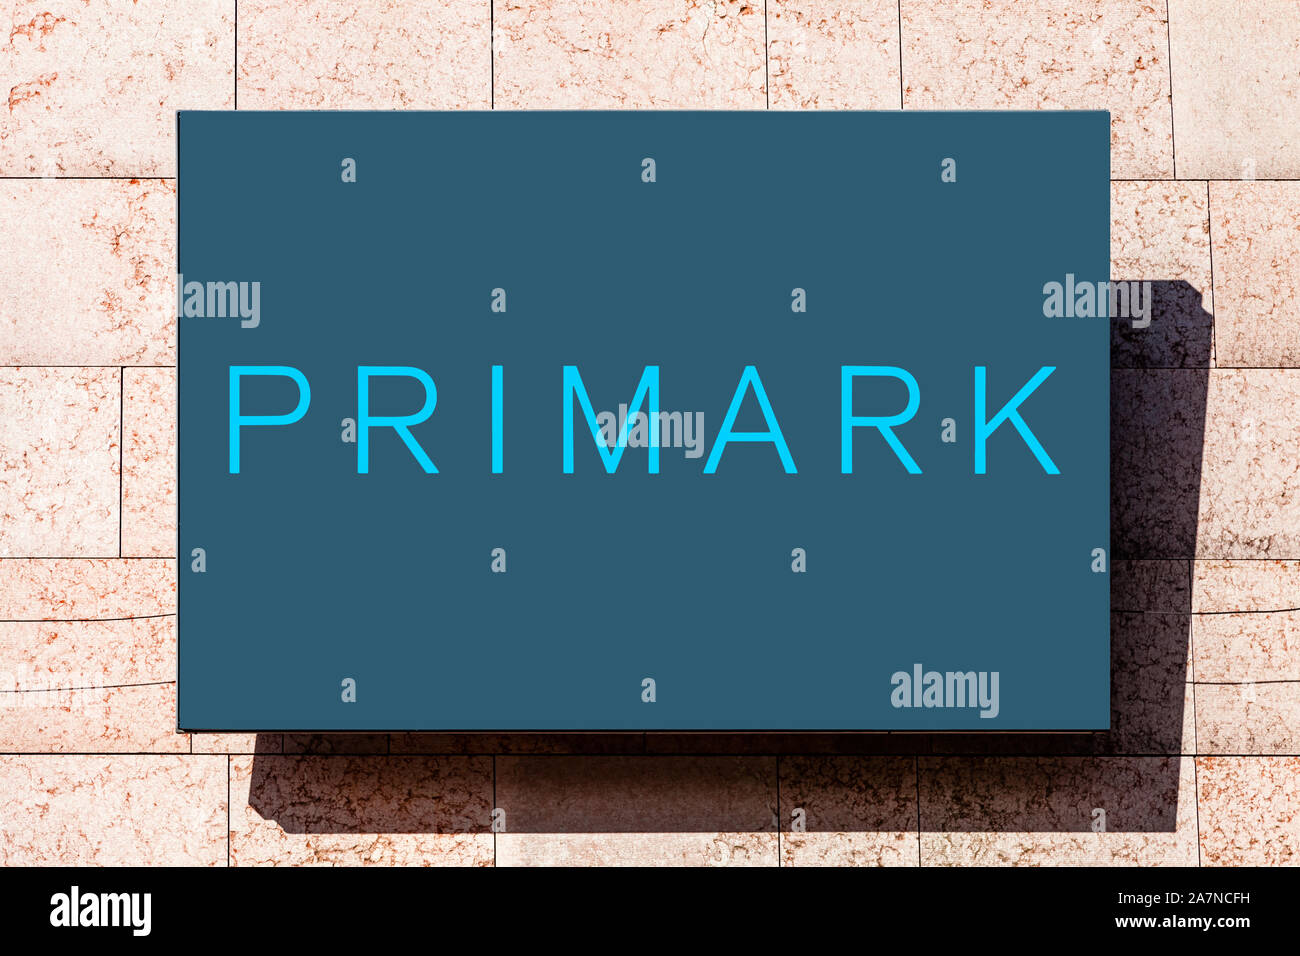 Primark Logo High Resolution Stock Photography and Images - Alamy